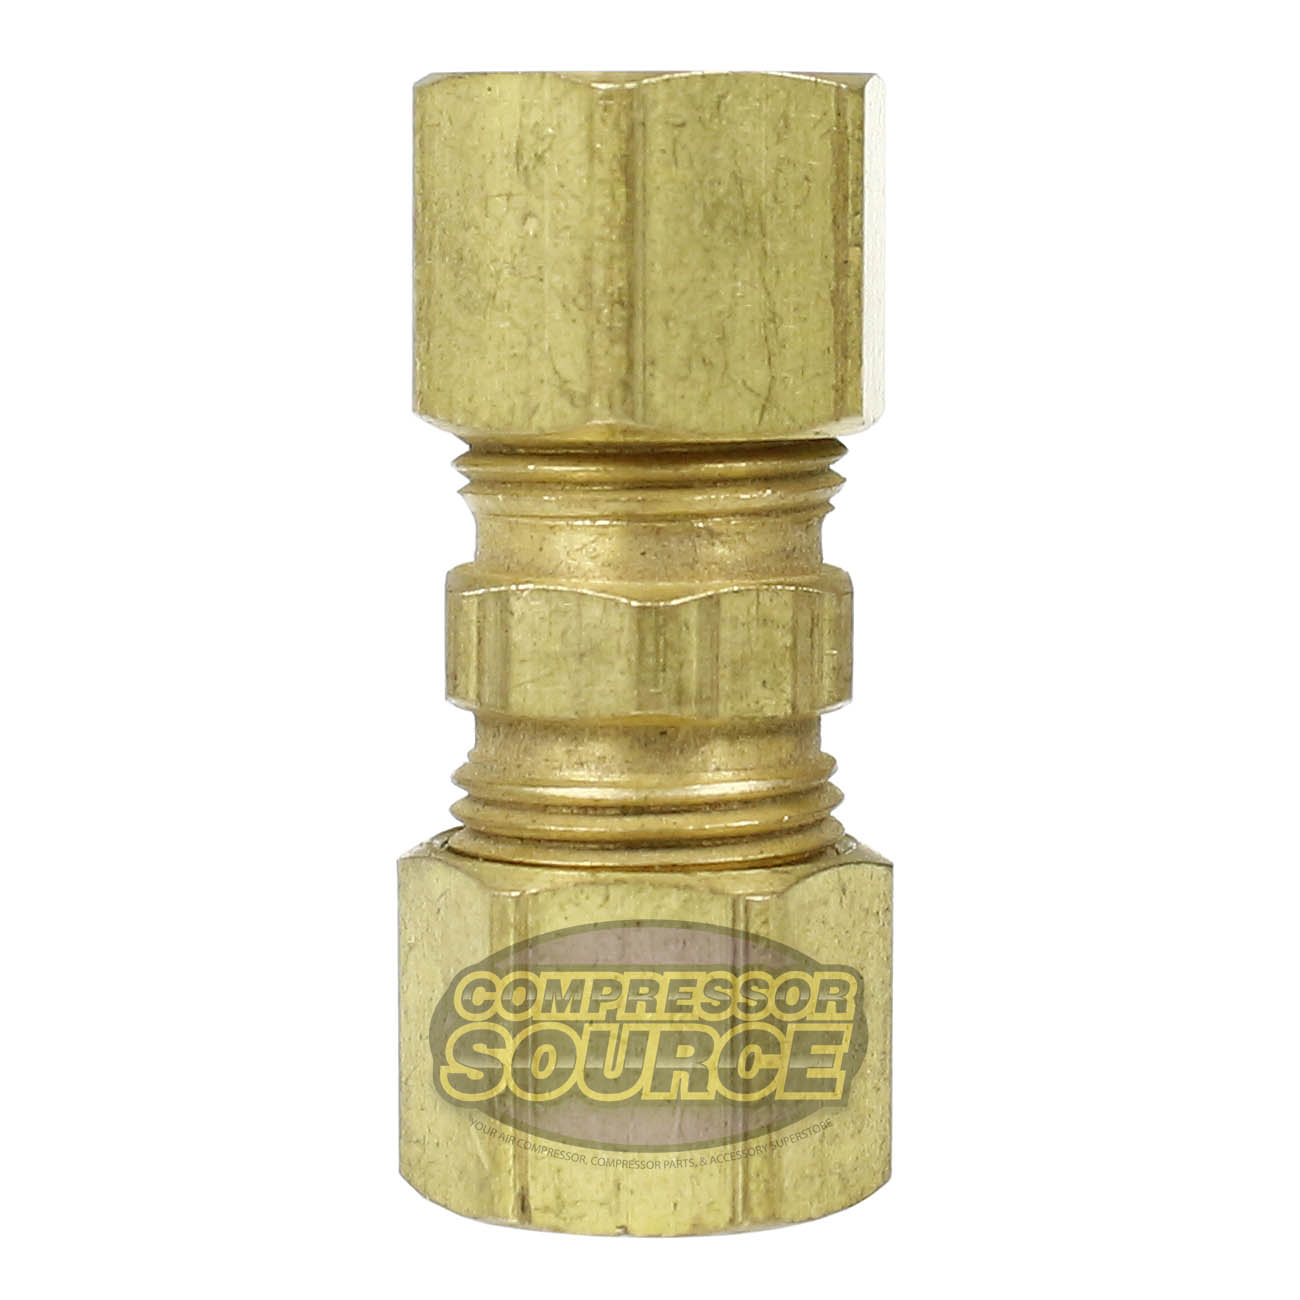 5/16" Yellow Brass Straight Compression Tube Equal Union Fitting Single 62D